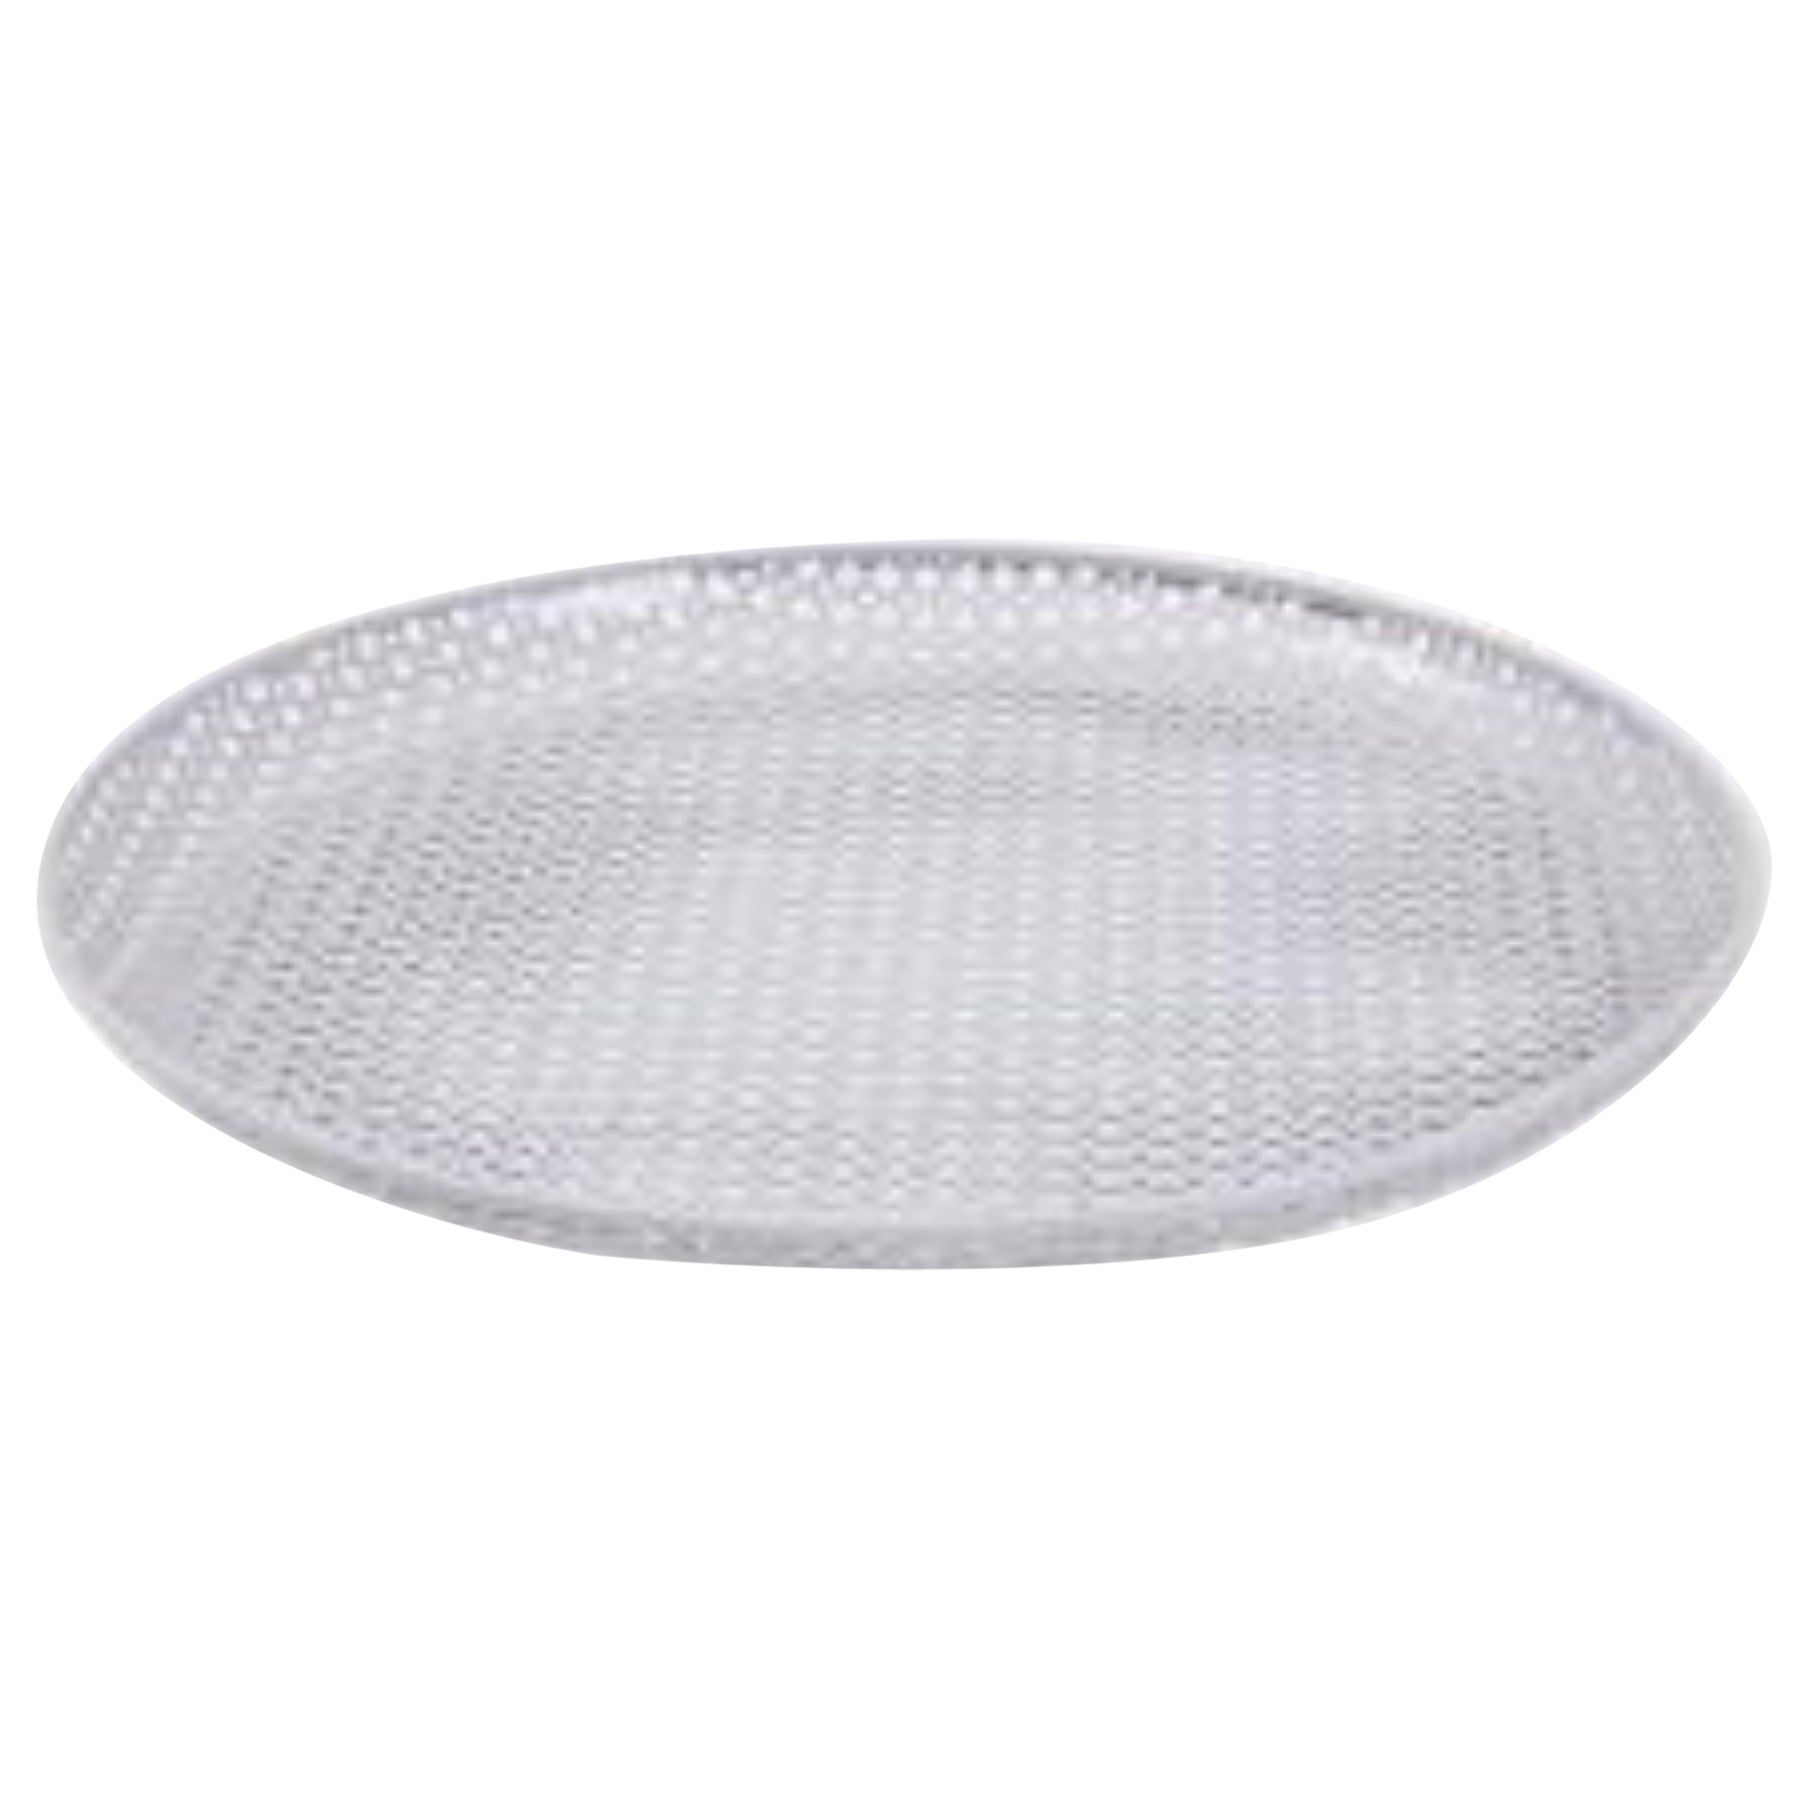 White Round Perforated Metal Tray by Mathieu Mategot, France, c. 1950